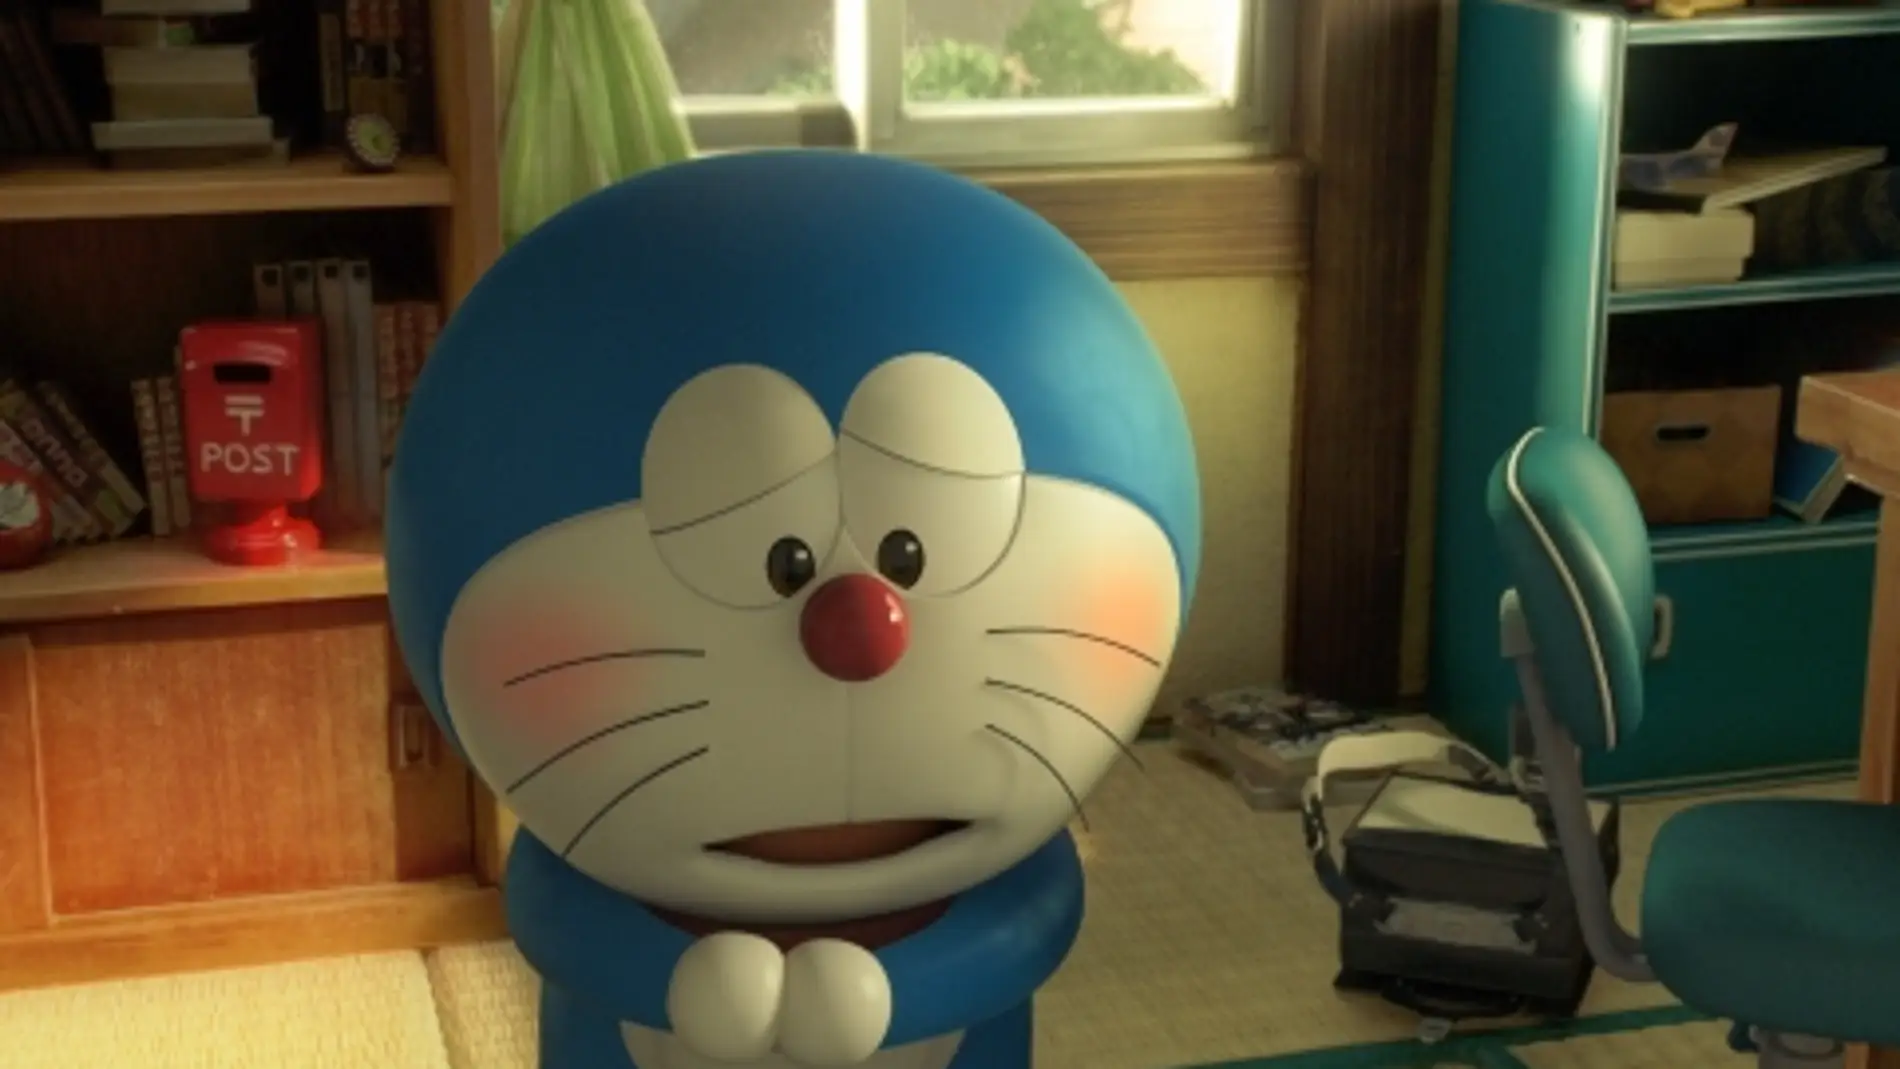 Stand by me Doraemon